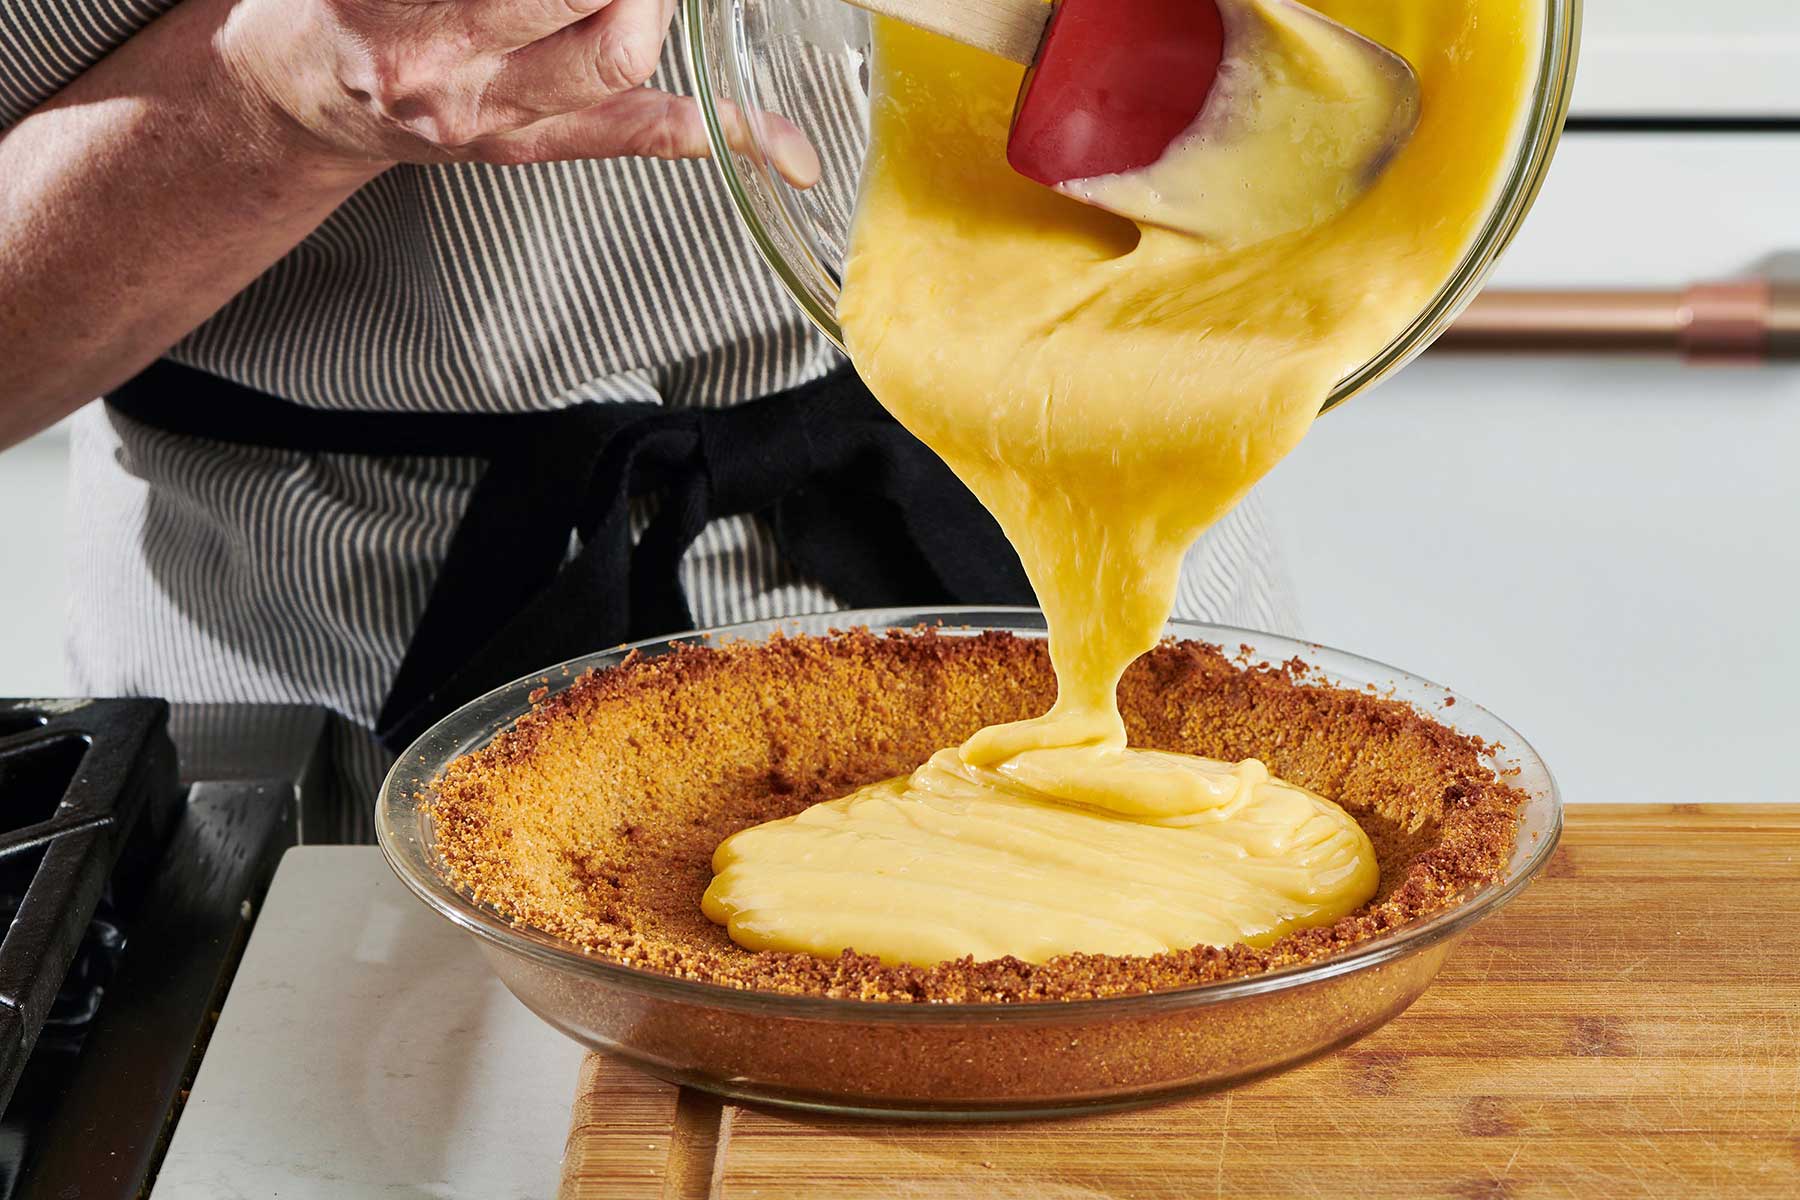 Pouring pie filling from a bowl into a baked pie crust.